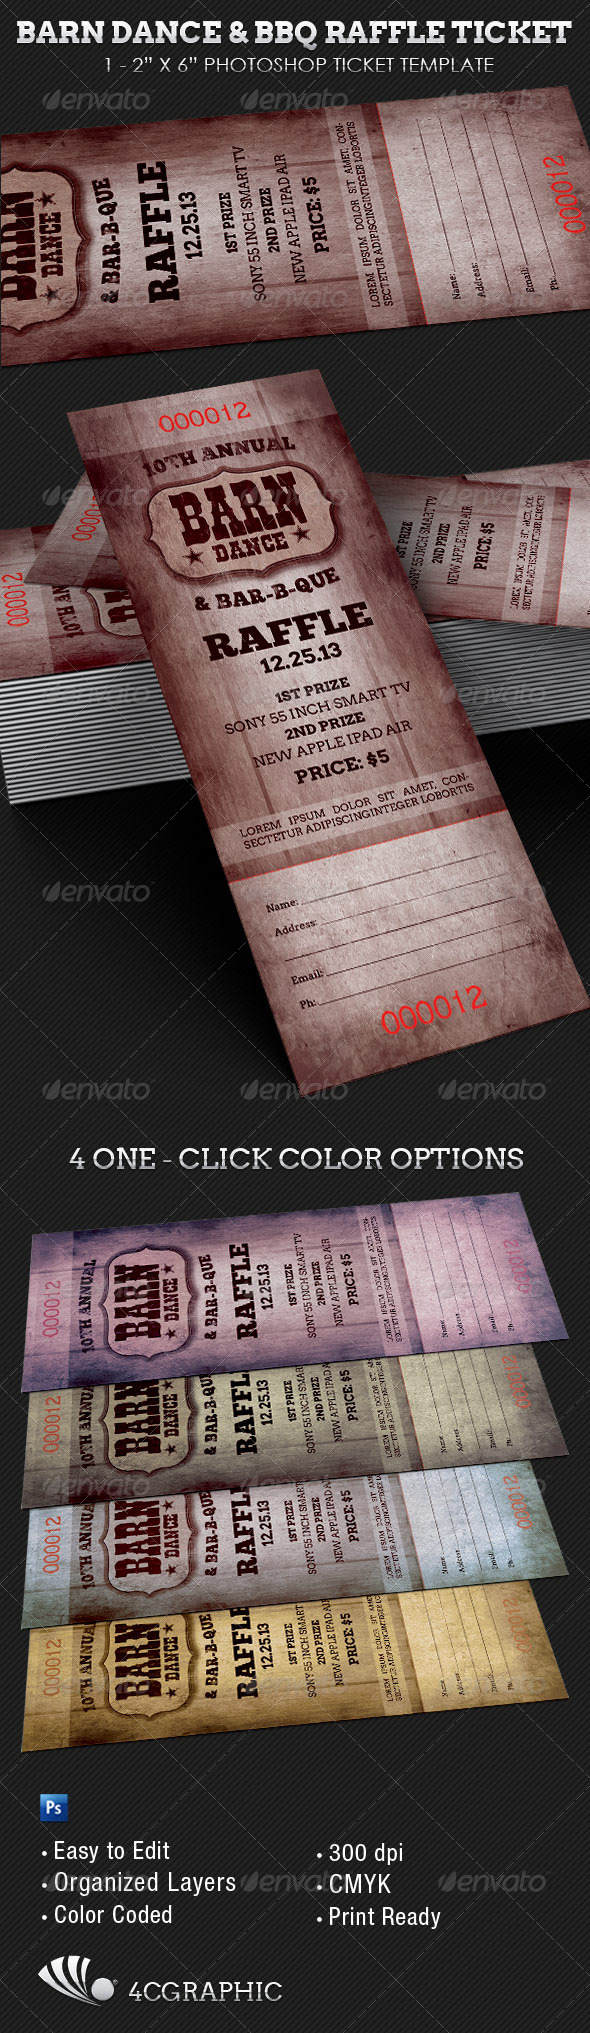 Barn Dance BBQ Raffle Ticket Template by 4cgraphic ...